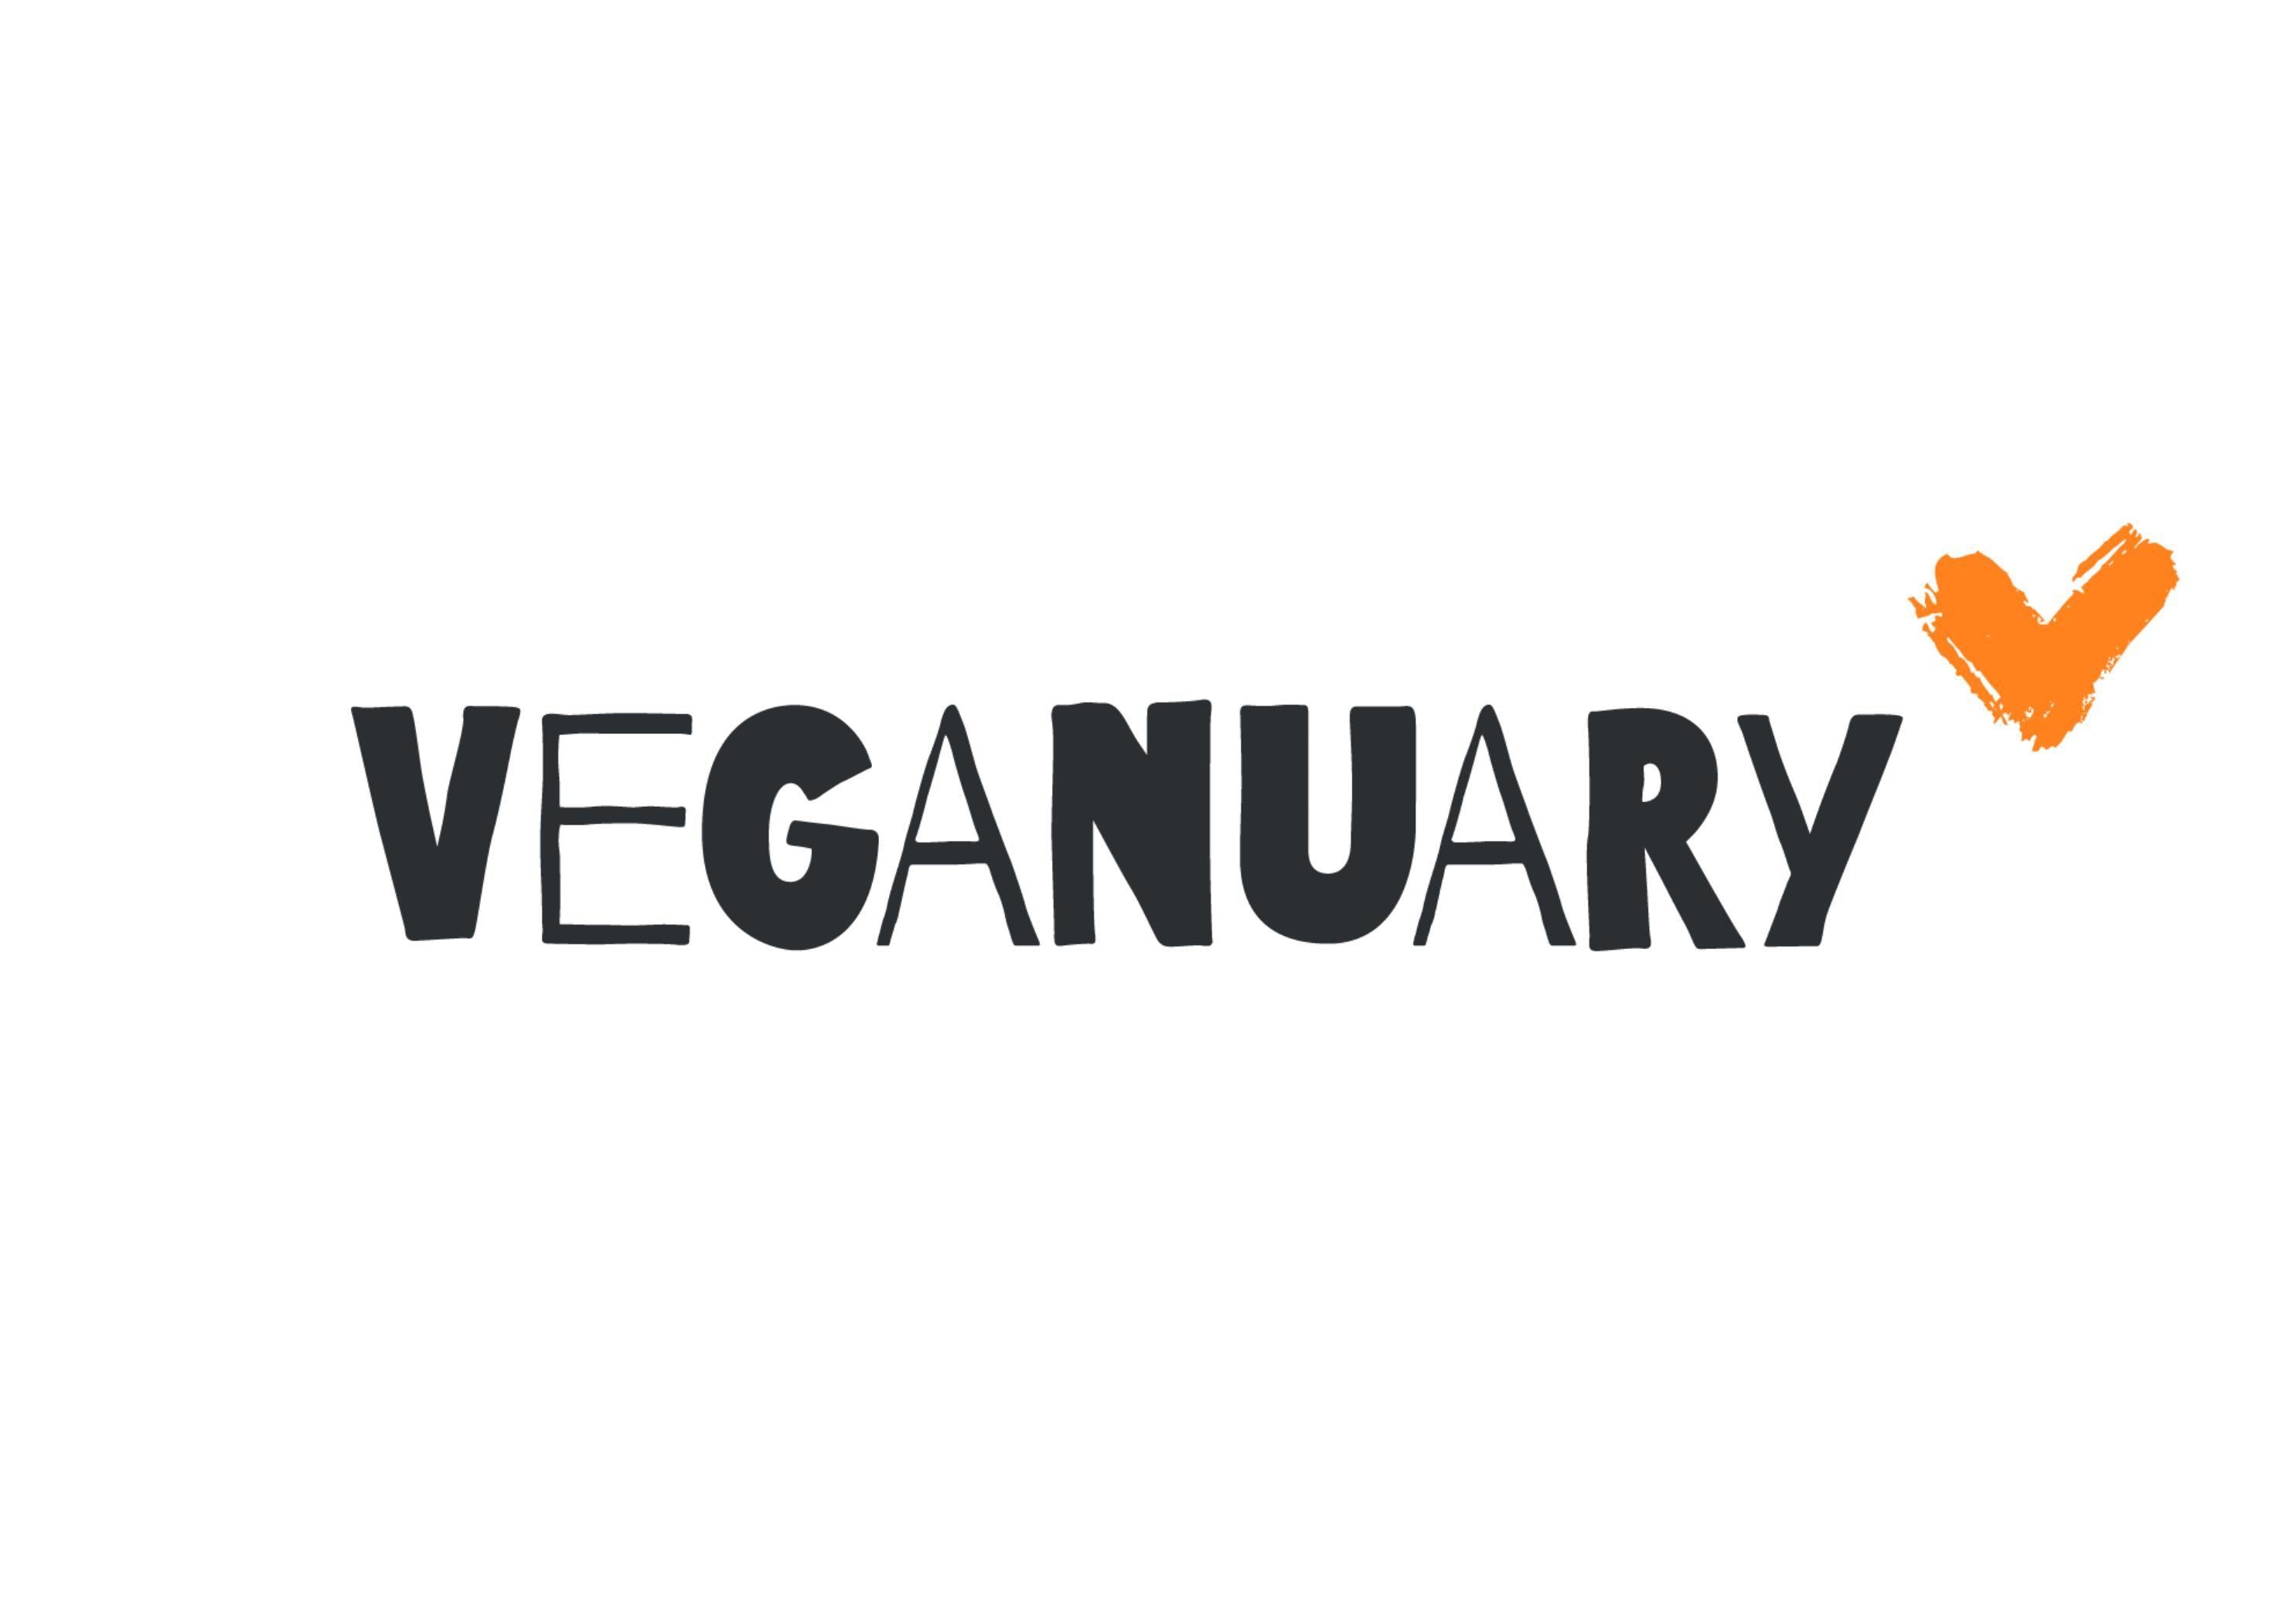 A4 edible topper with the Veganuary Orange logo